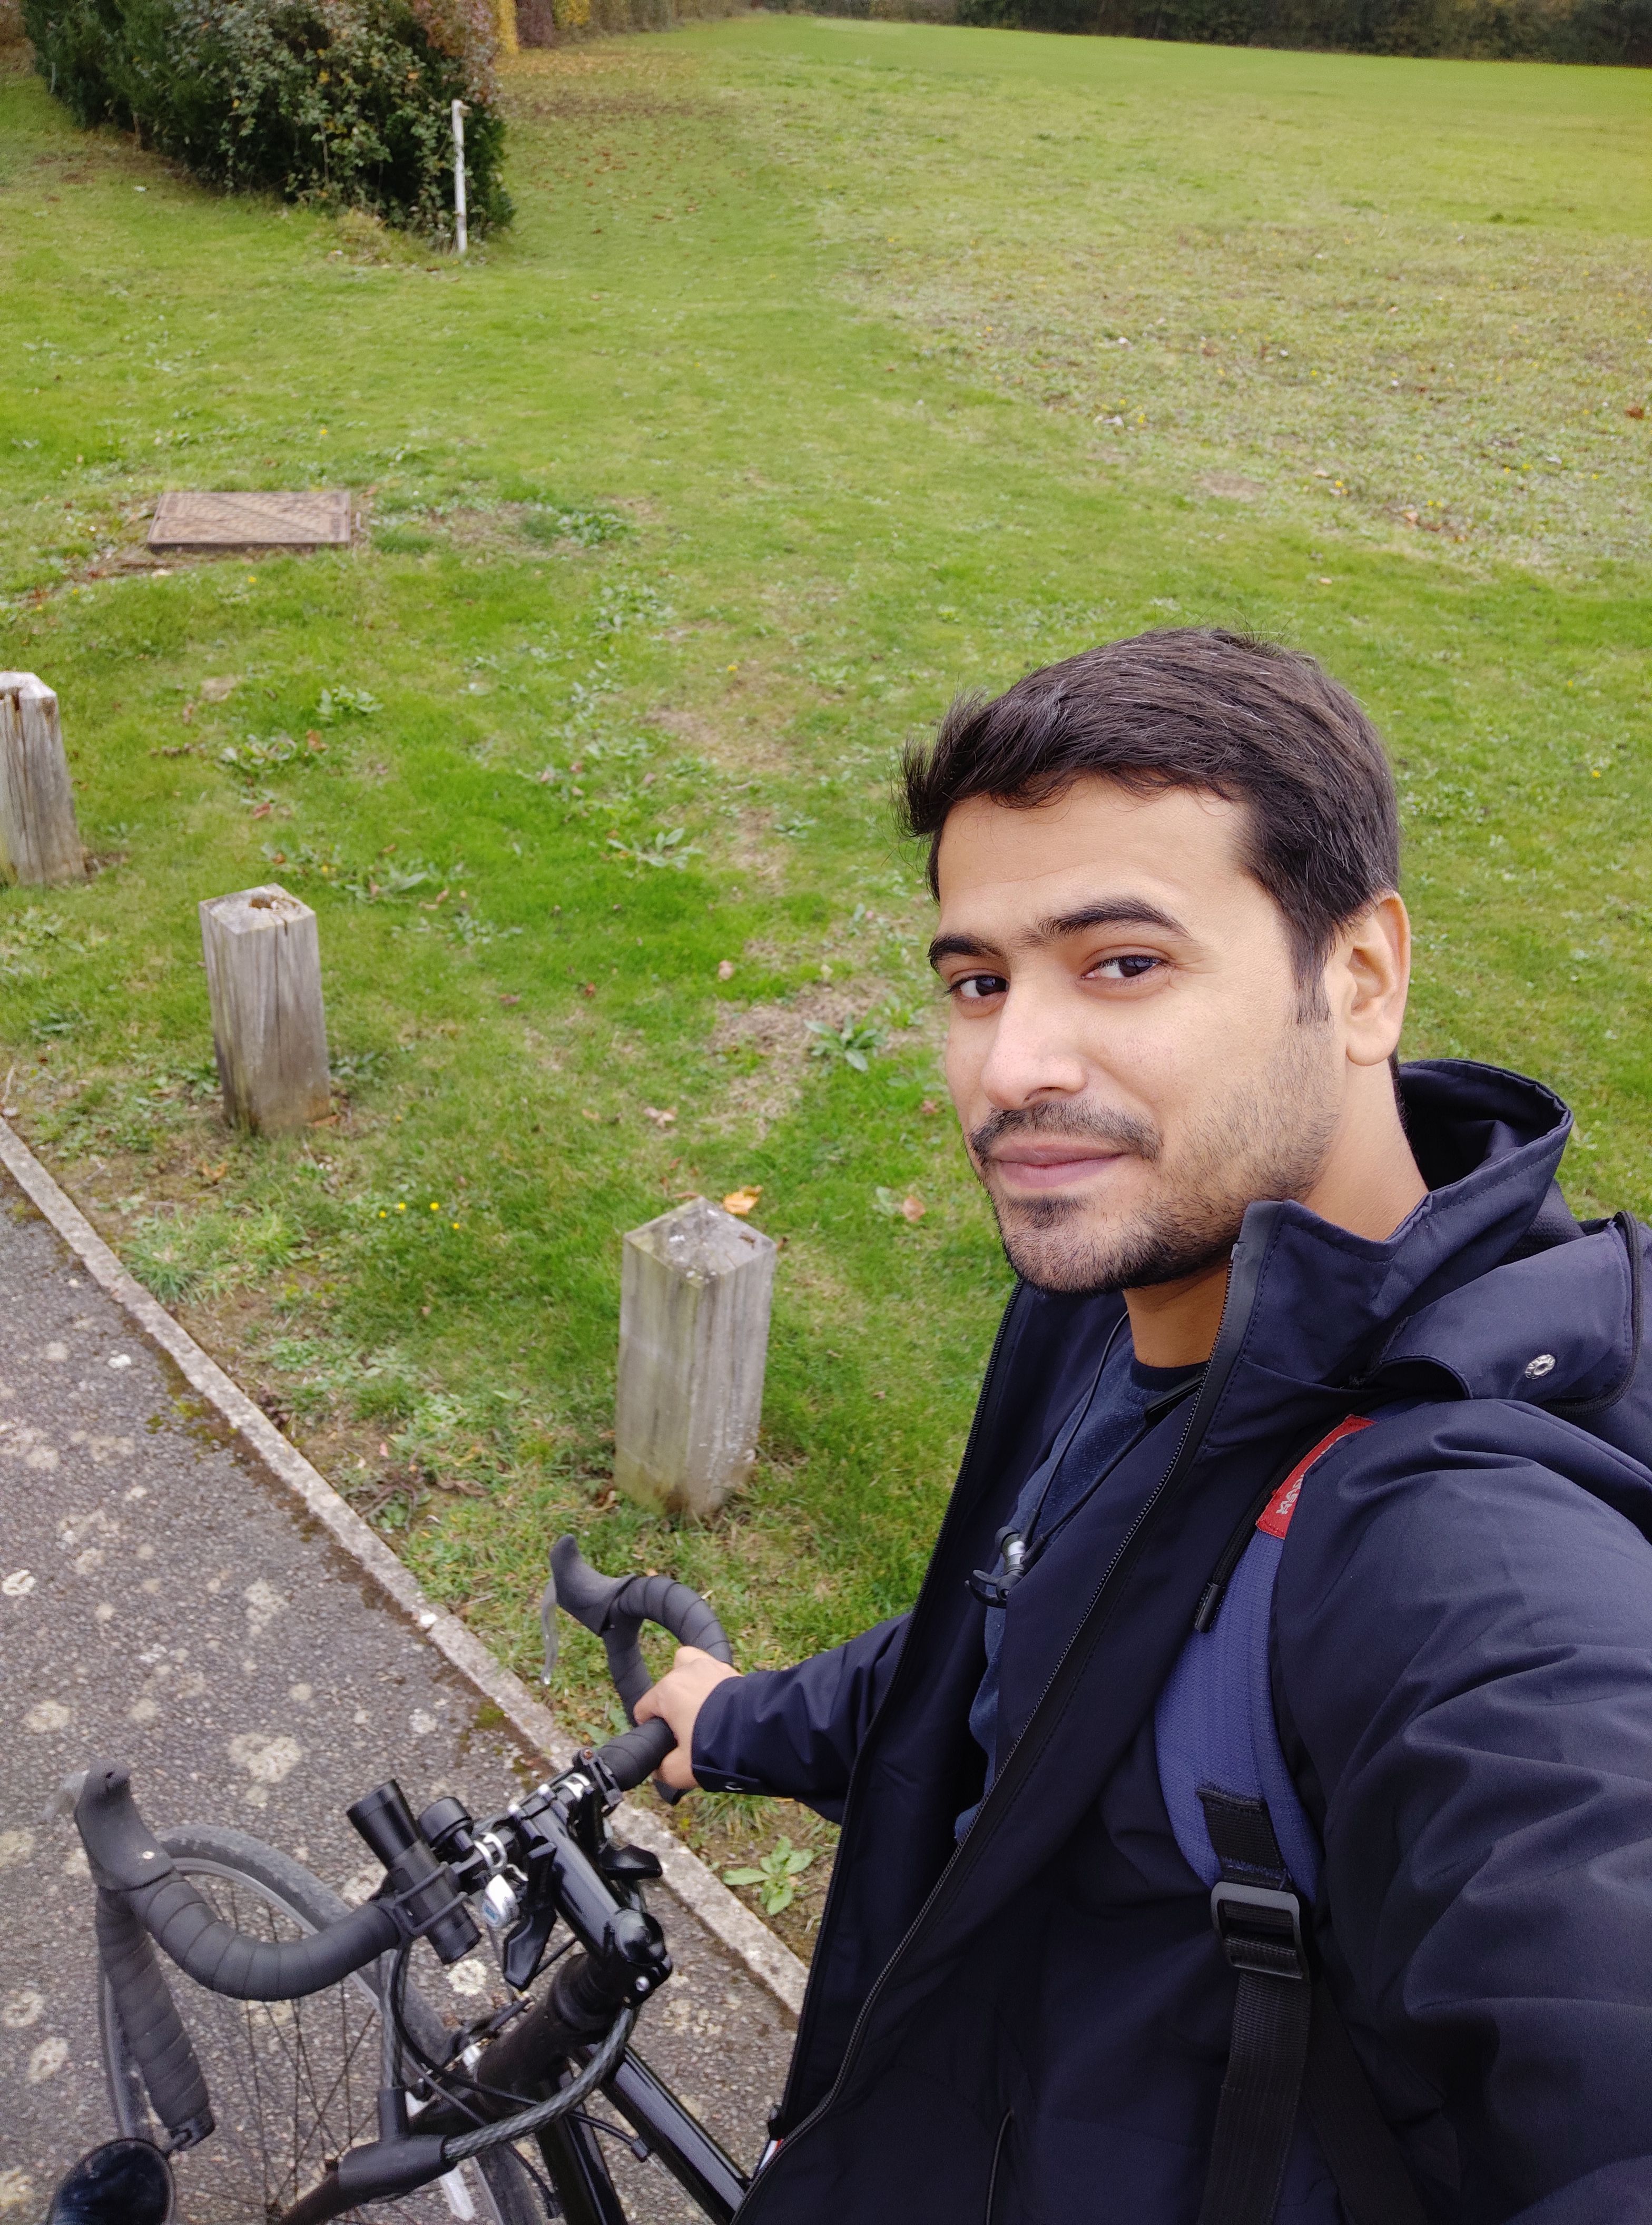 Arjun cycling in his local park